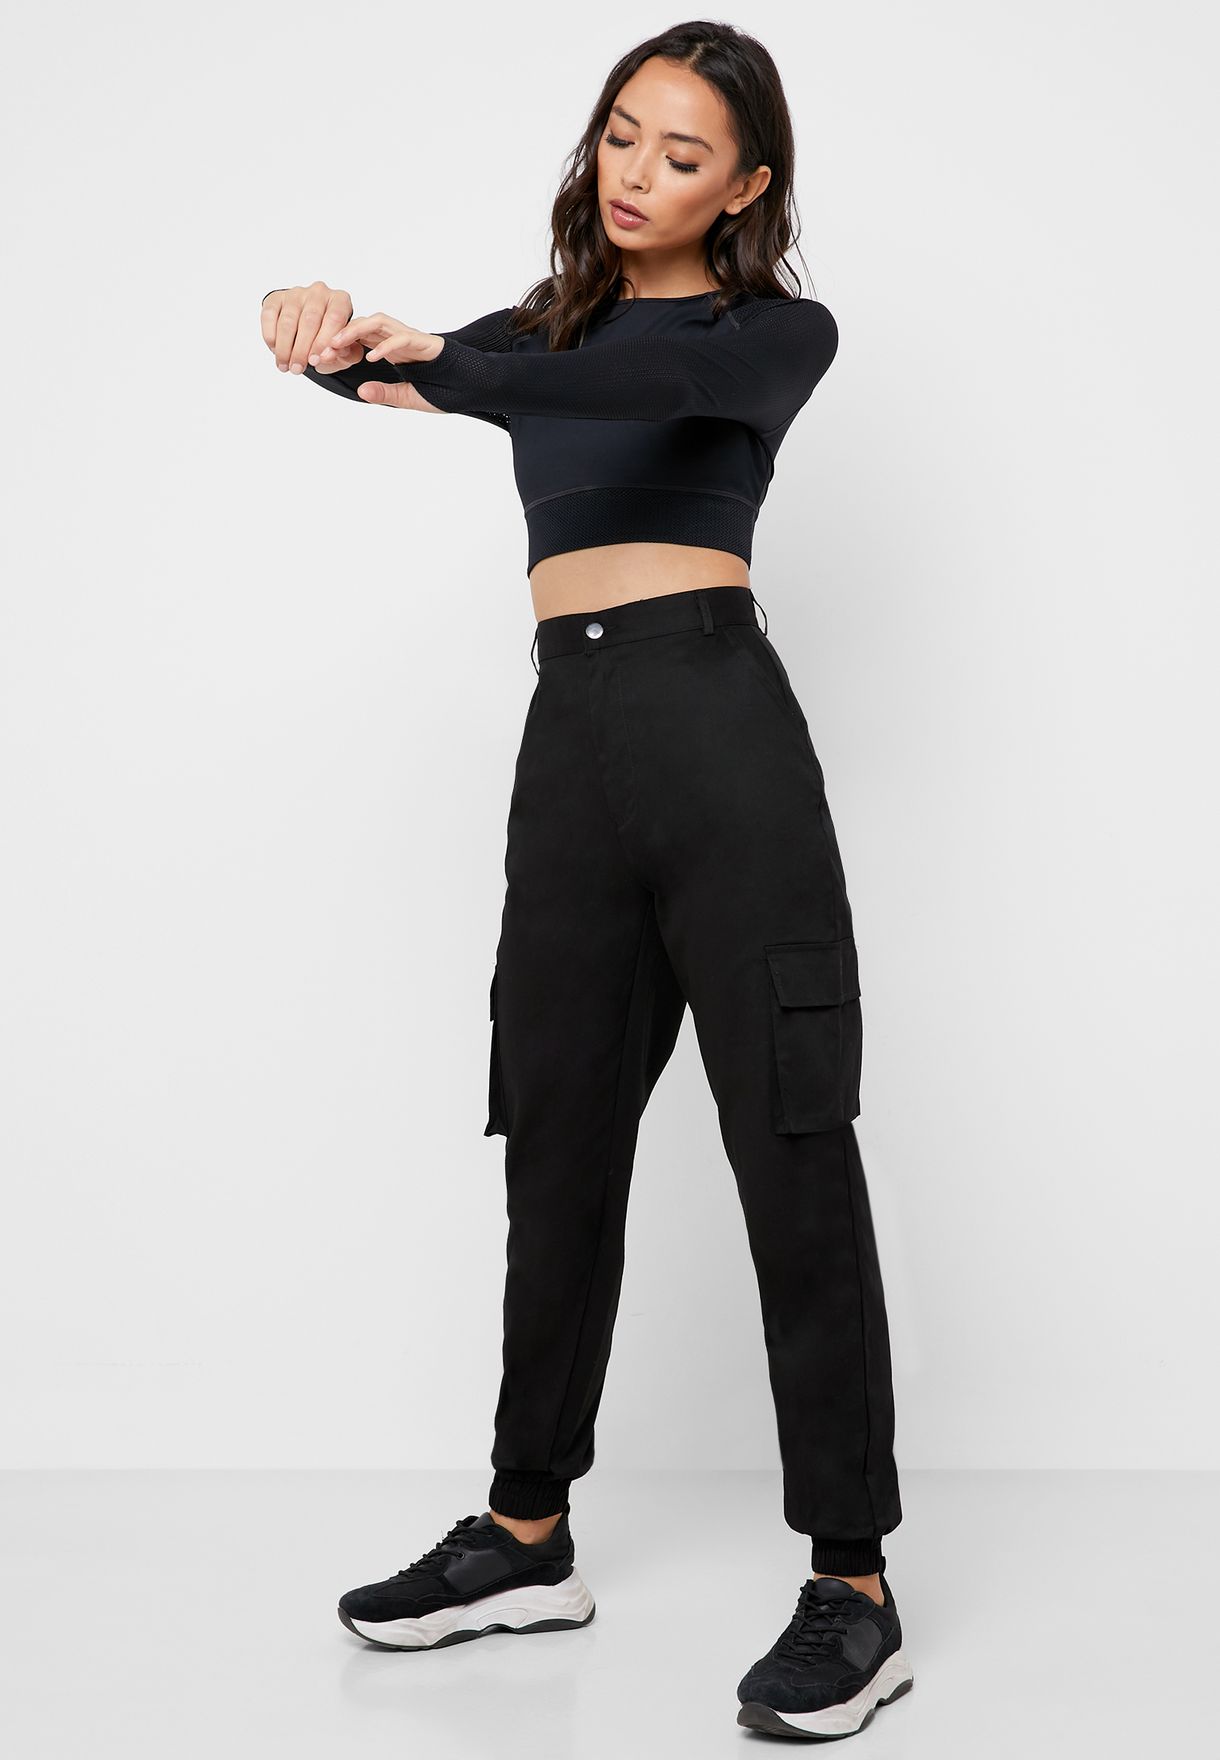 women's petite cargo pants with pockets